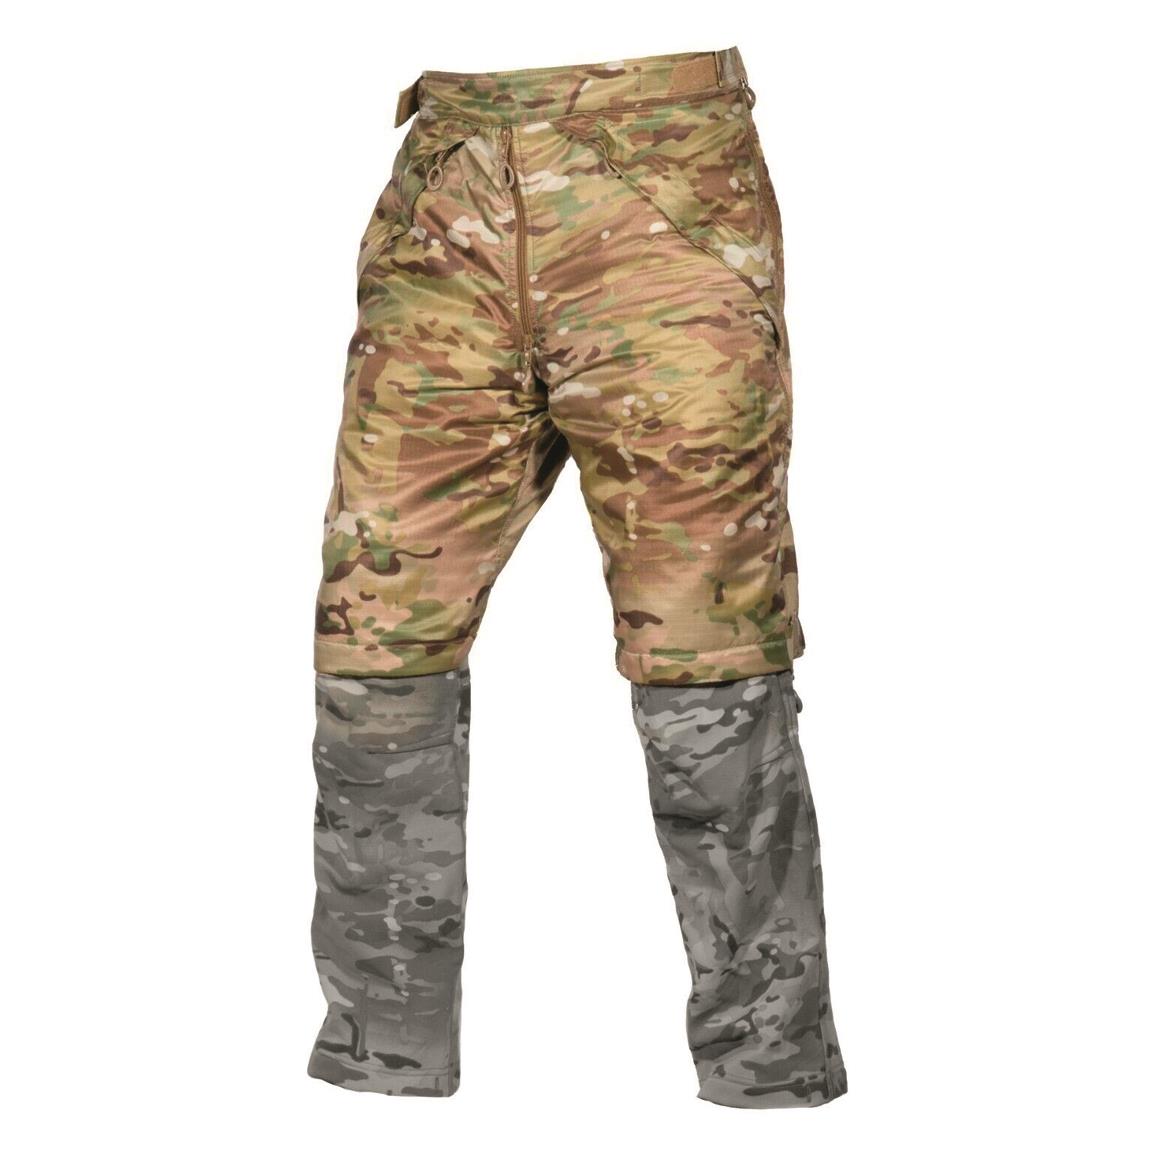 U.S. Military Surplus Beyond A8 Insulated Shorts, New, Multicam®